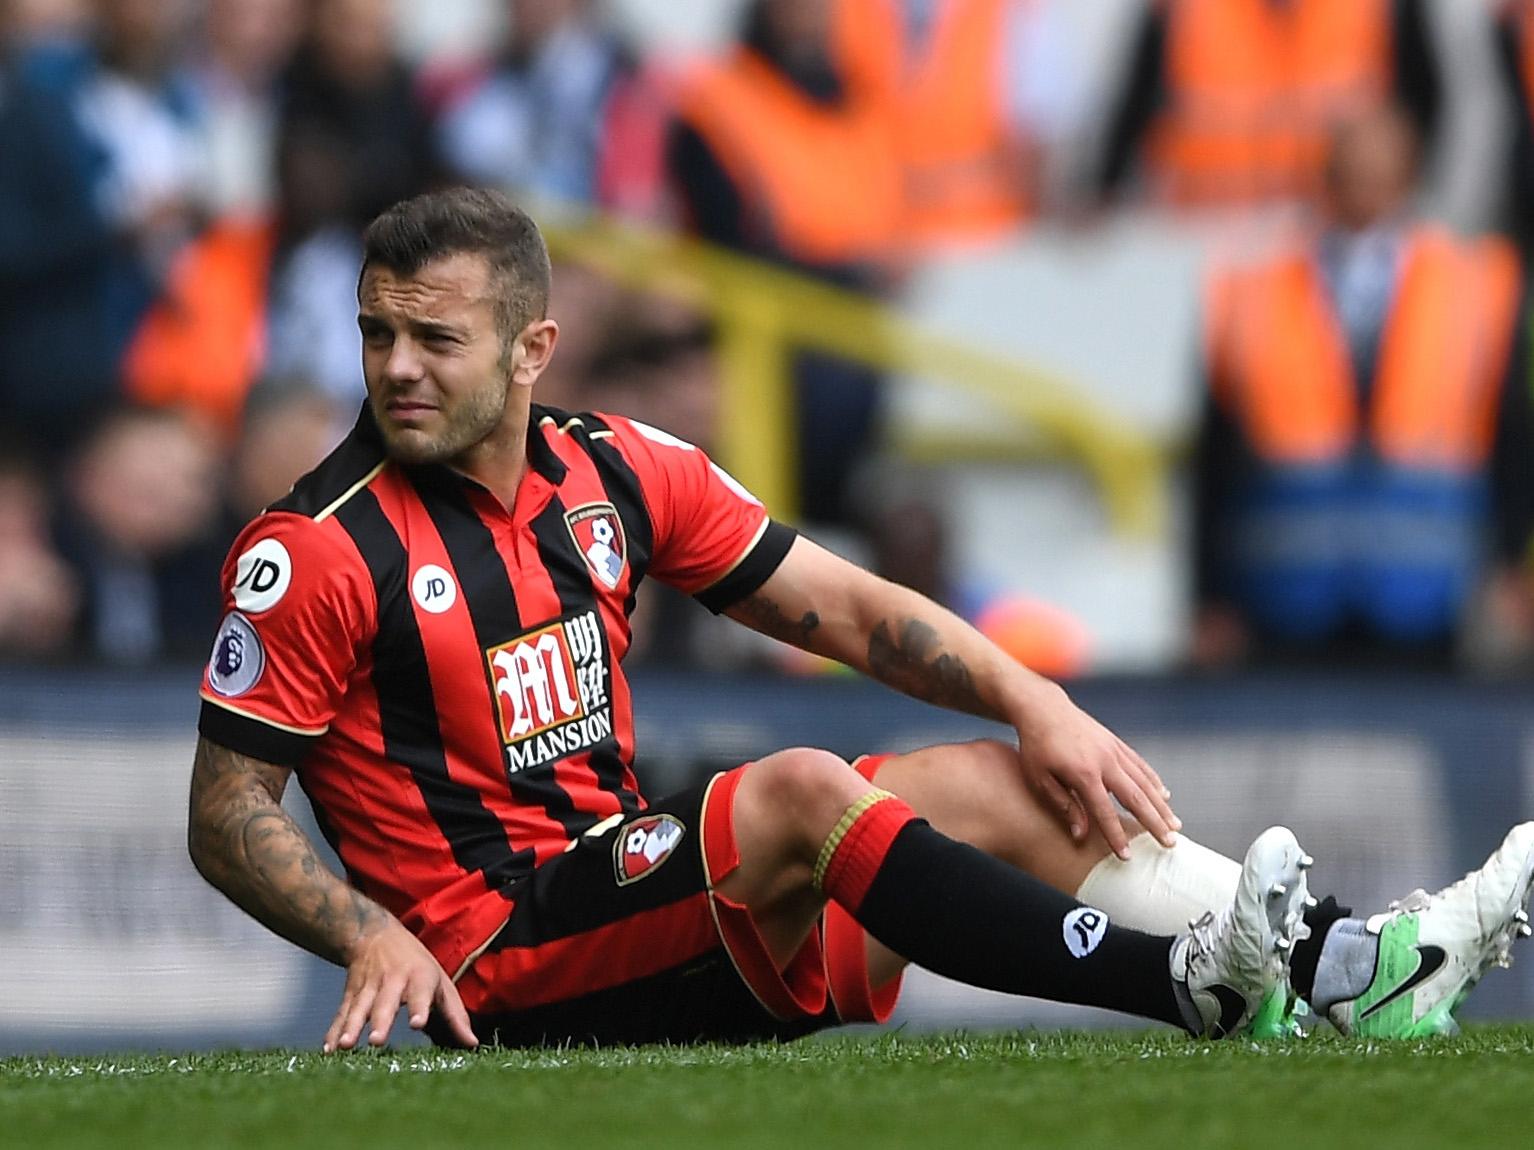 Jack Wilshere's season ended last month with a broken leg